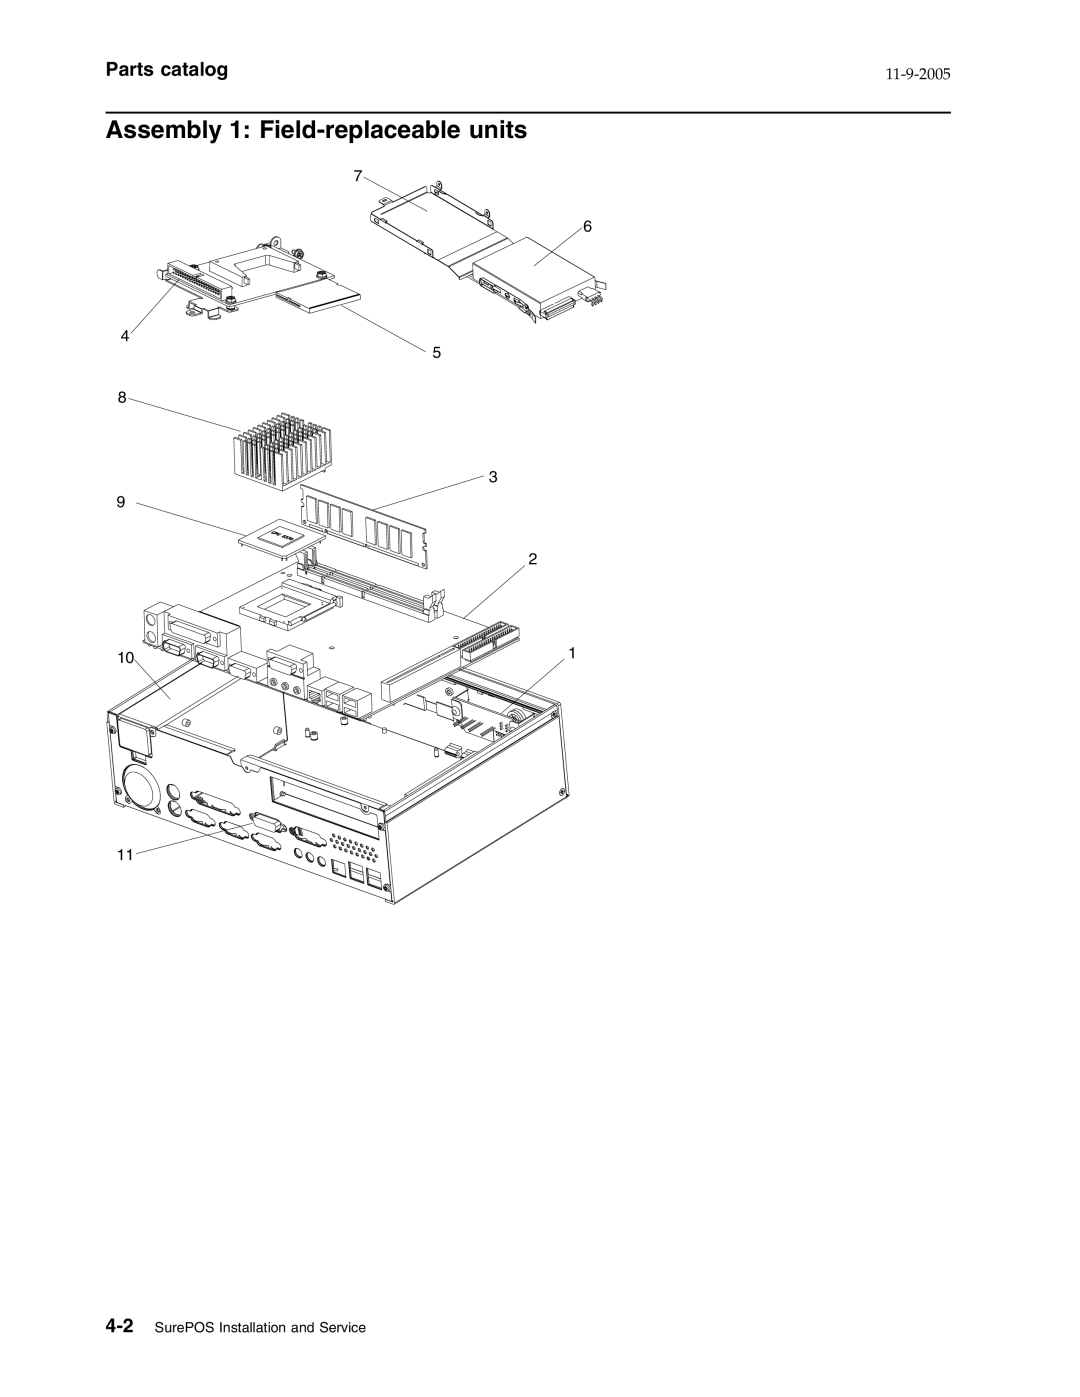 IBM W2H, 31x, 32x manual Assembly 1 Field-replaceable units, Parts catalog, 11-9-2005 